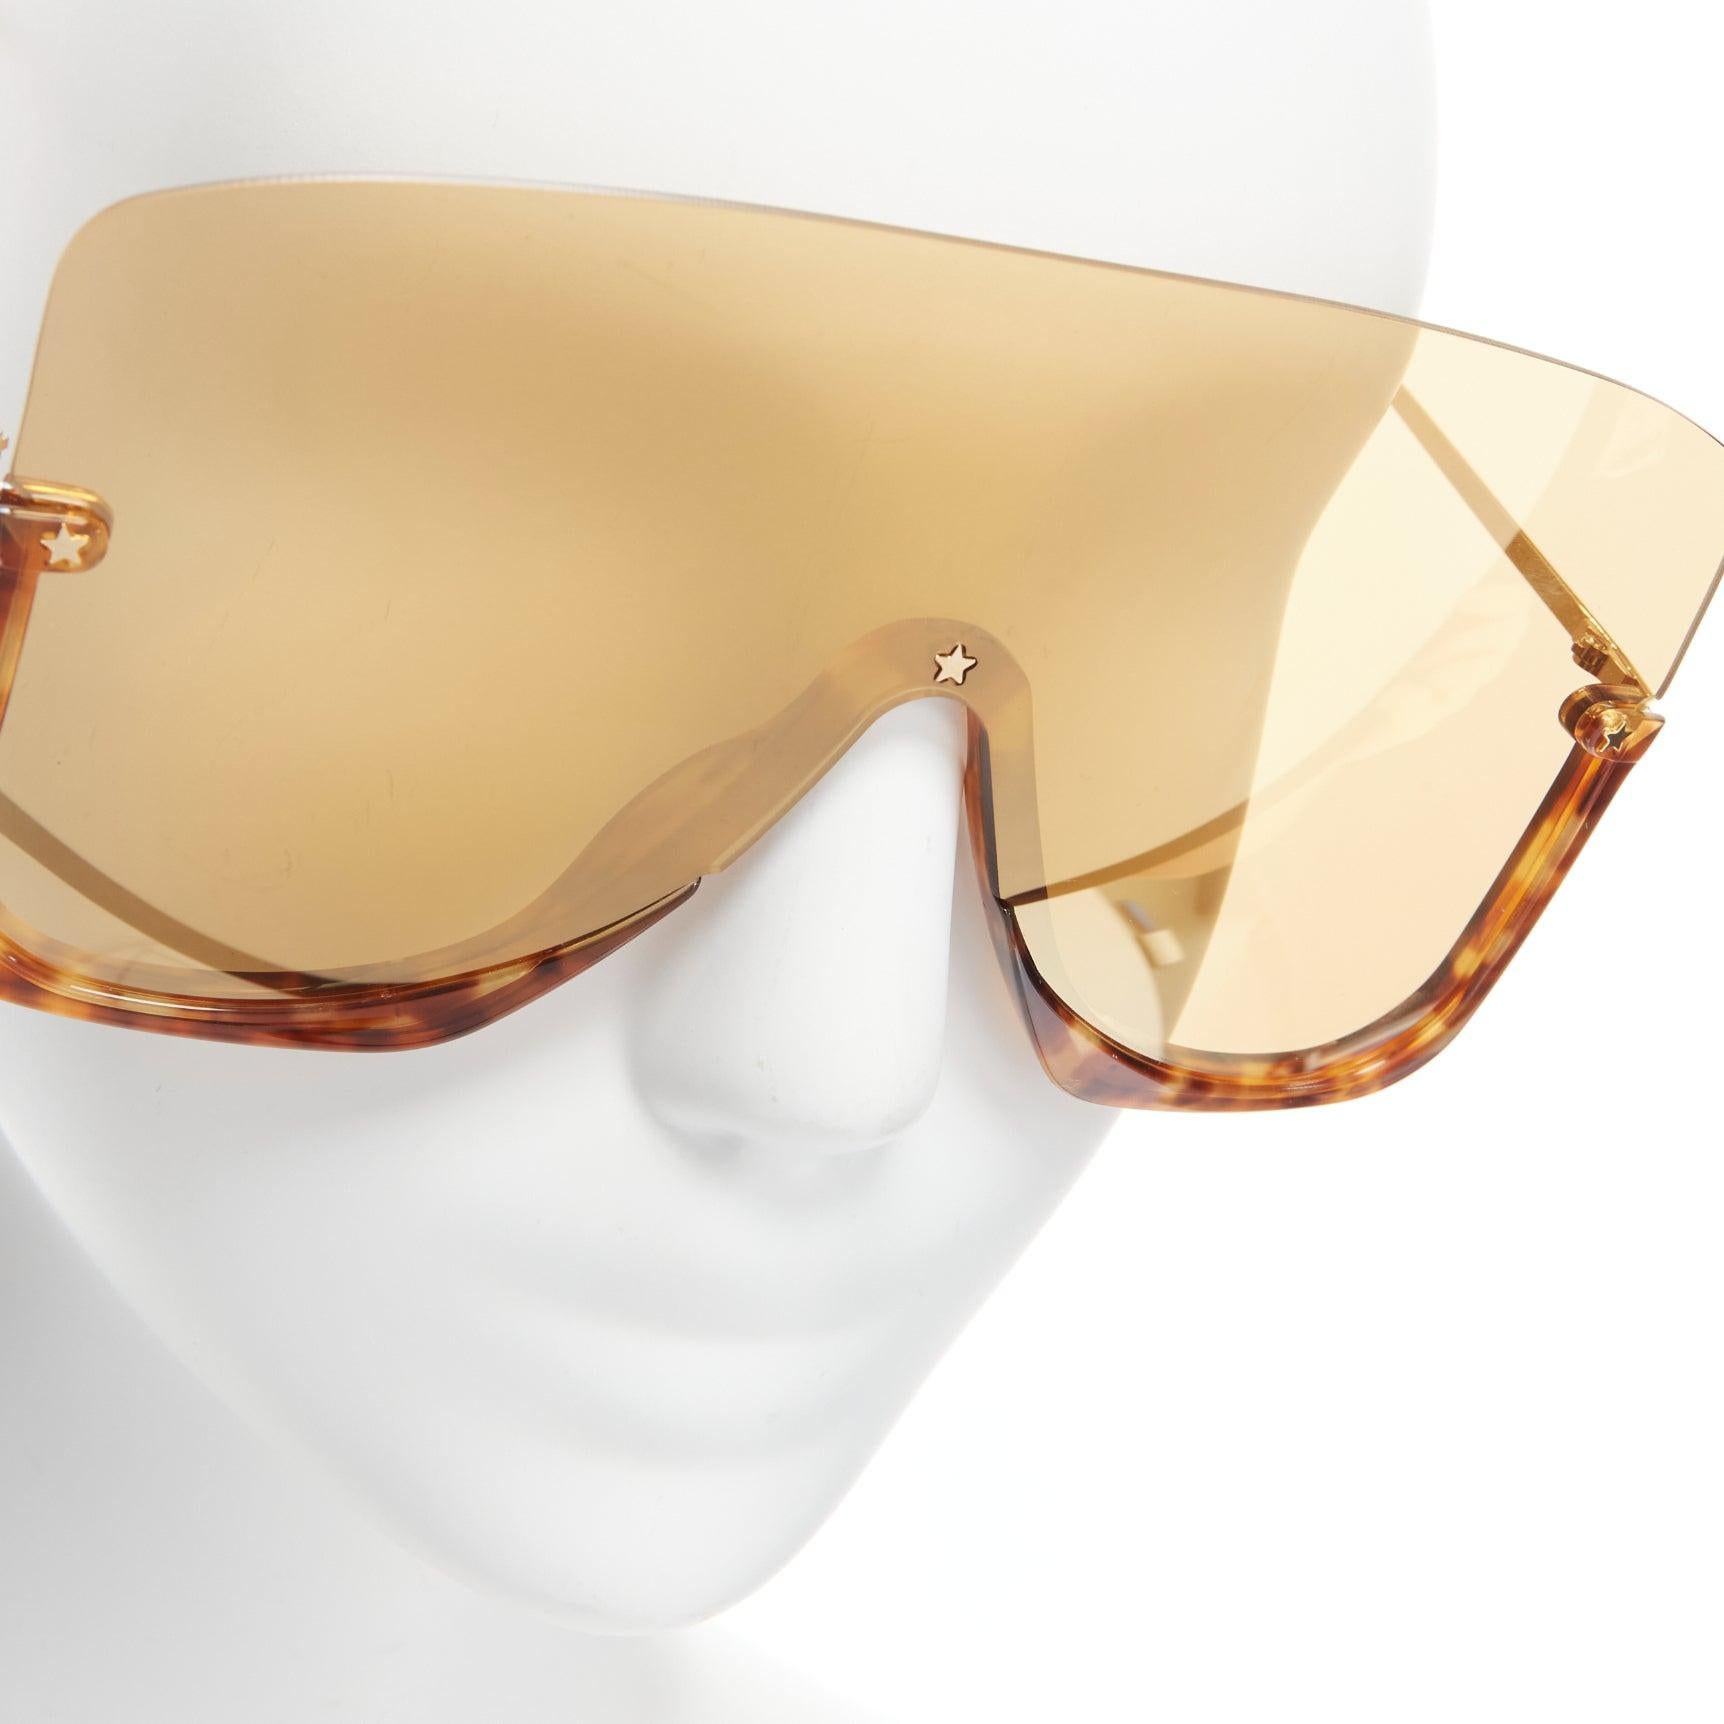 GUCCI GG0540S Blonde Havana brown oversized shield sunglasses
Reference: TGAS/D00638
Brand: Gucci
Designer: Alessandro Michele
Model: GG0540S
Material: Acetate
Color: Brown, Gold
Pattern: Solid
Lining: Gold Metal
Extra Details: Part of the Cruise